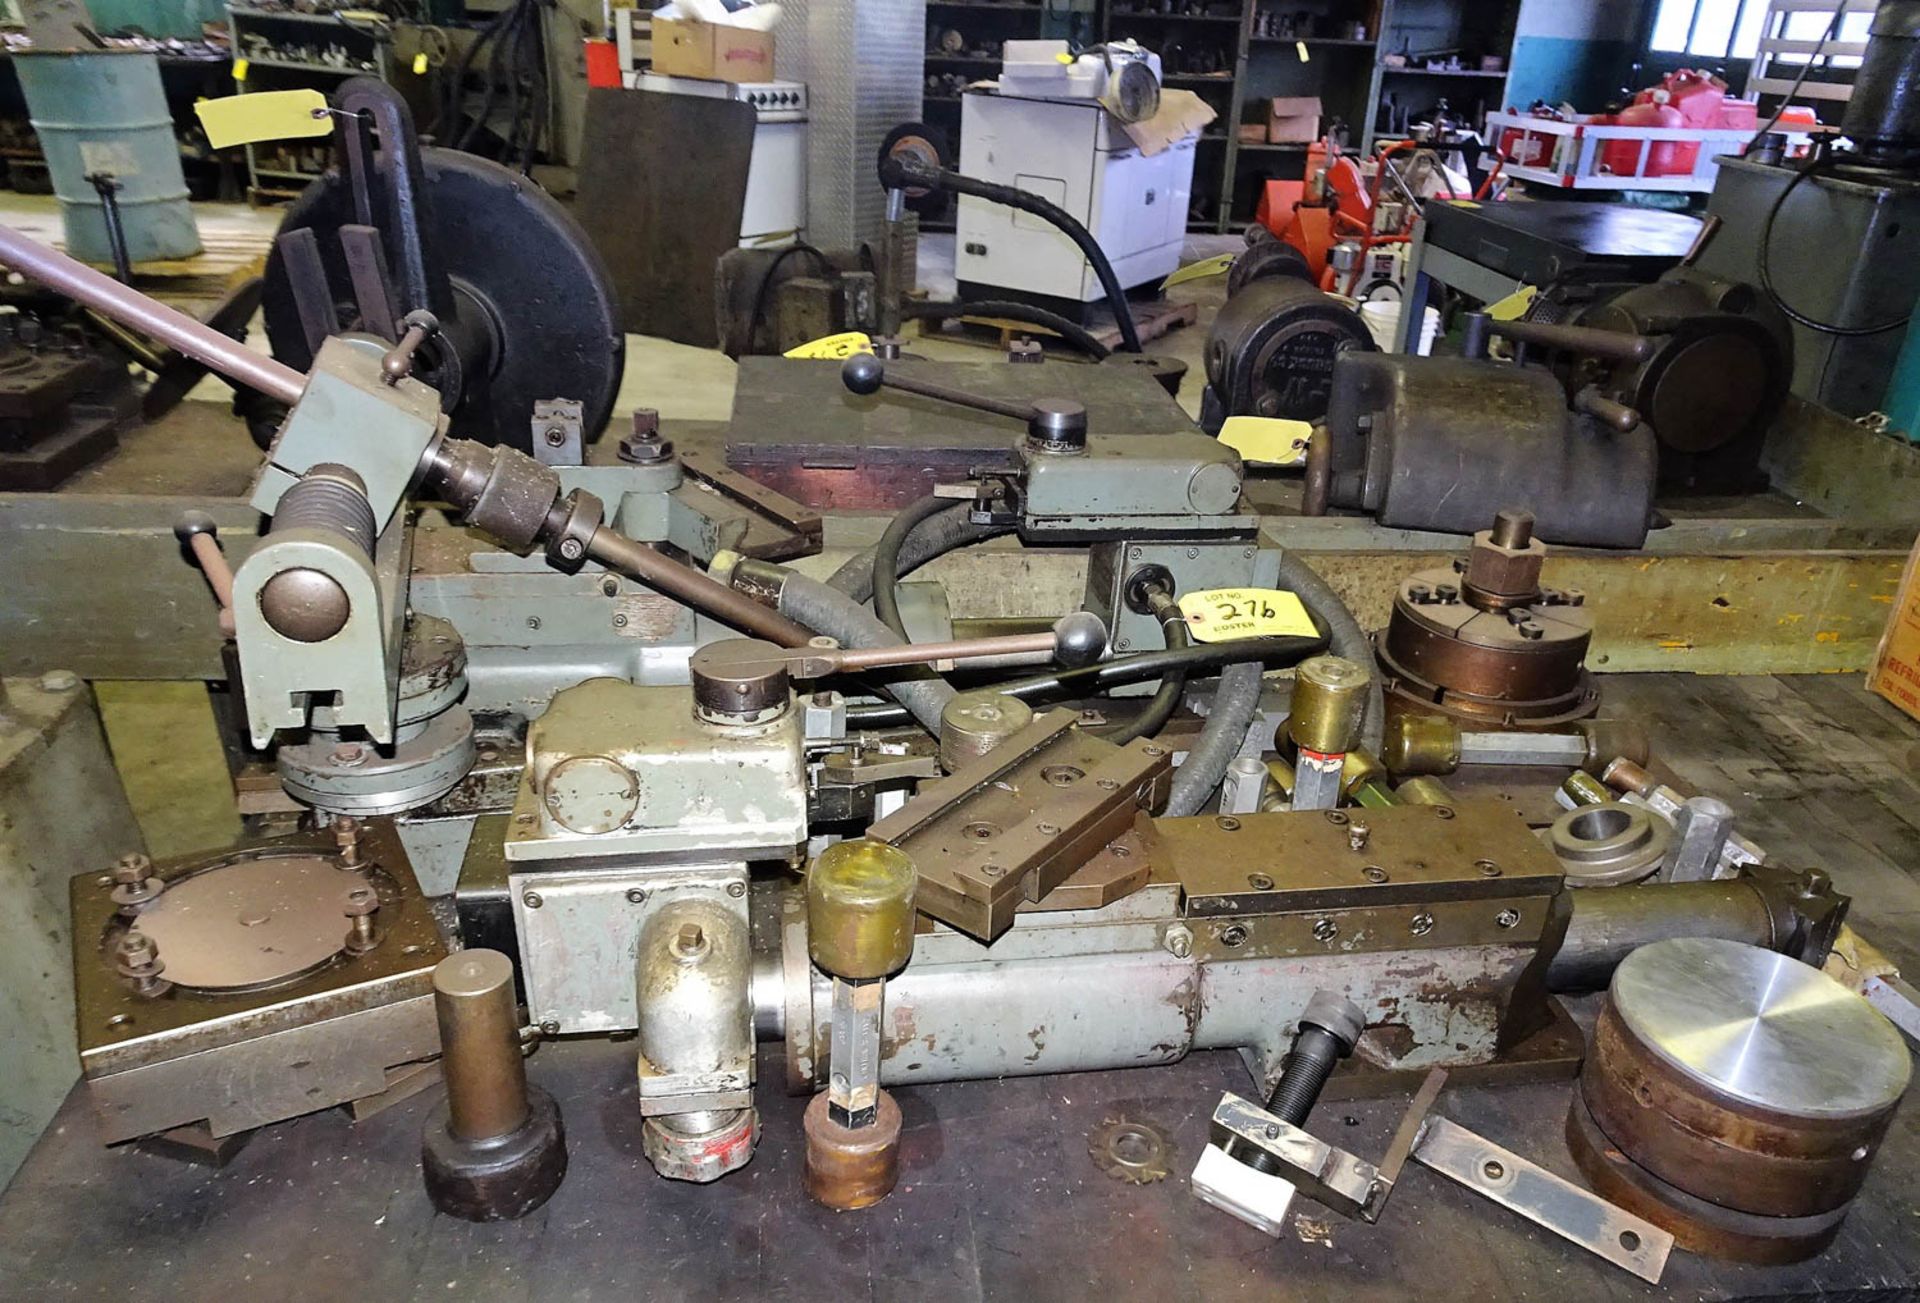 (2) STEEL FRAMED WOOD TOP WORK BENCHES WITH CONTENTS, INCLUDING: TRACER MACHINE PARTS, THREAD - Image 2 of 5